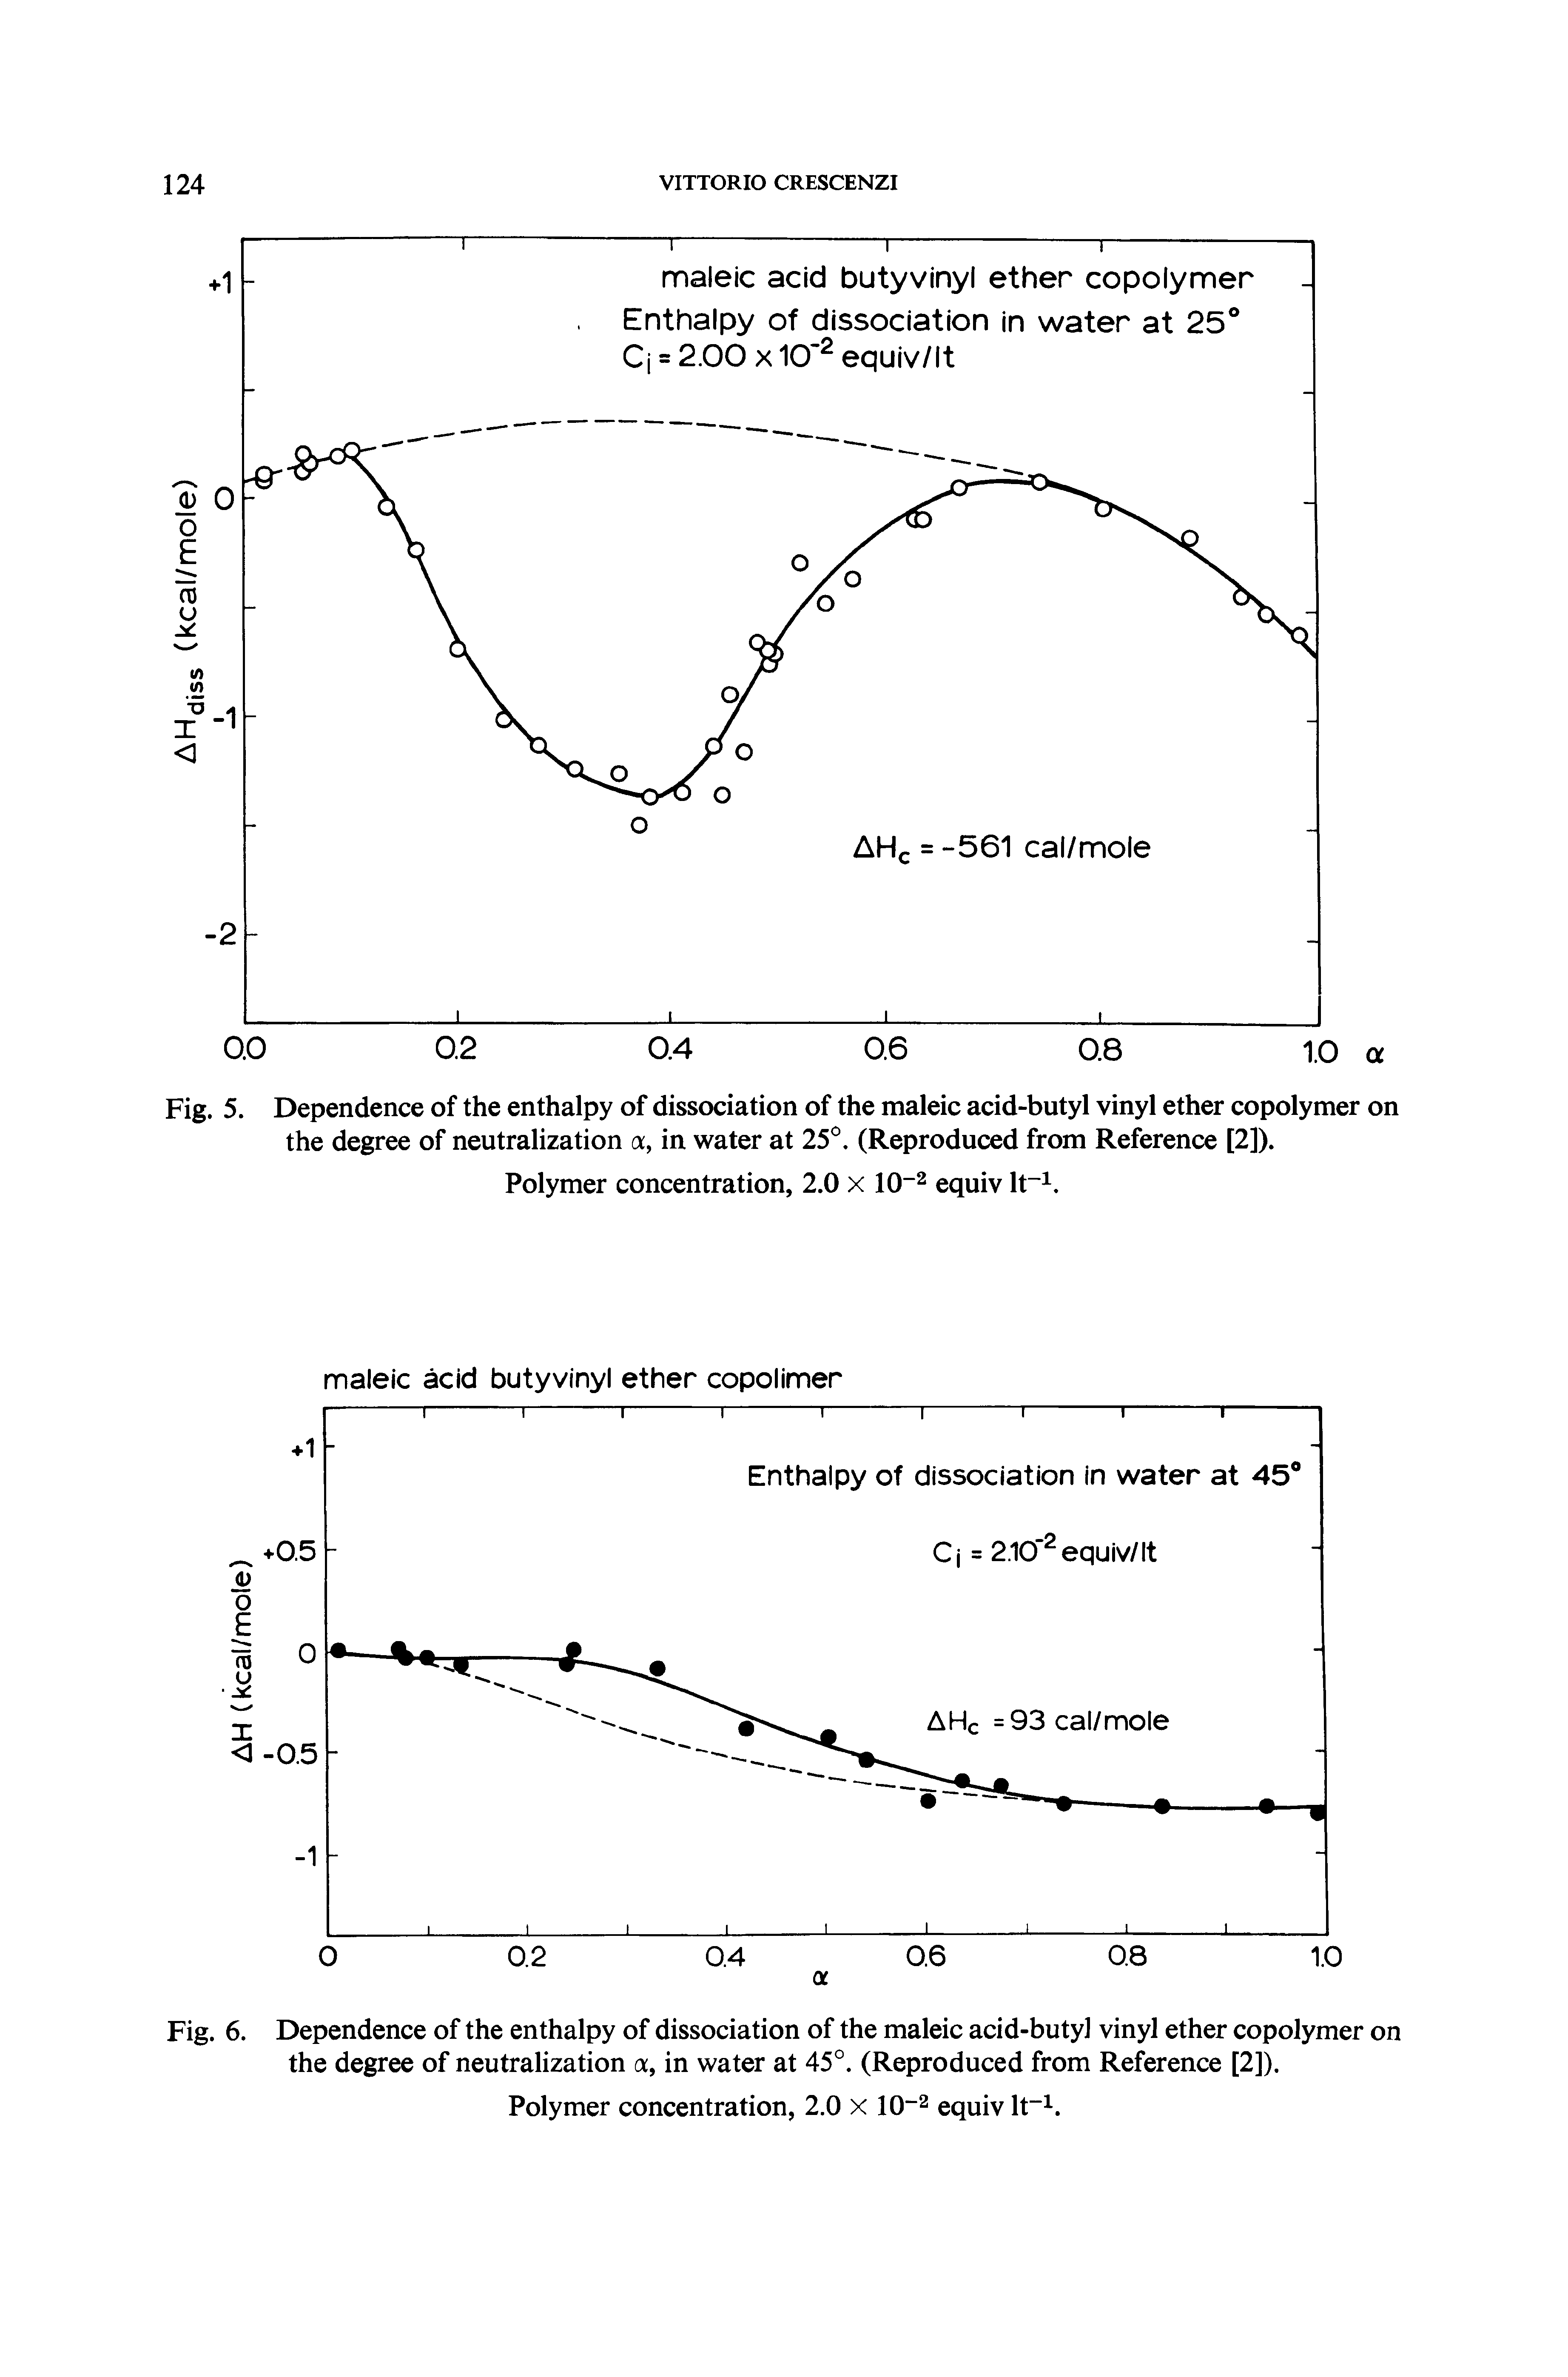 Fig. 5. Dependence of the enthalpy of dissociation of the maleic acid-butyl vinyl ether copolymer on the degree of neutralization ct, in water at 25. (Reproduced from Reference [2]).